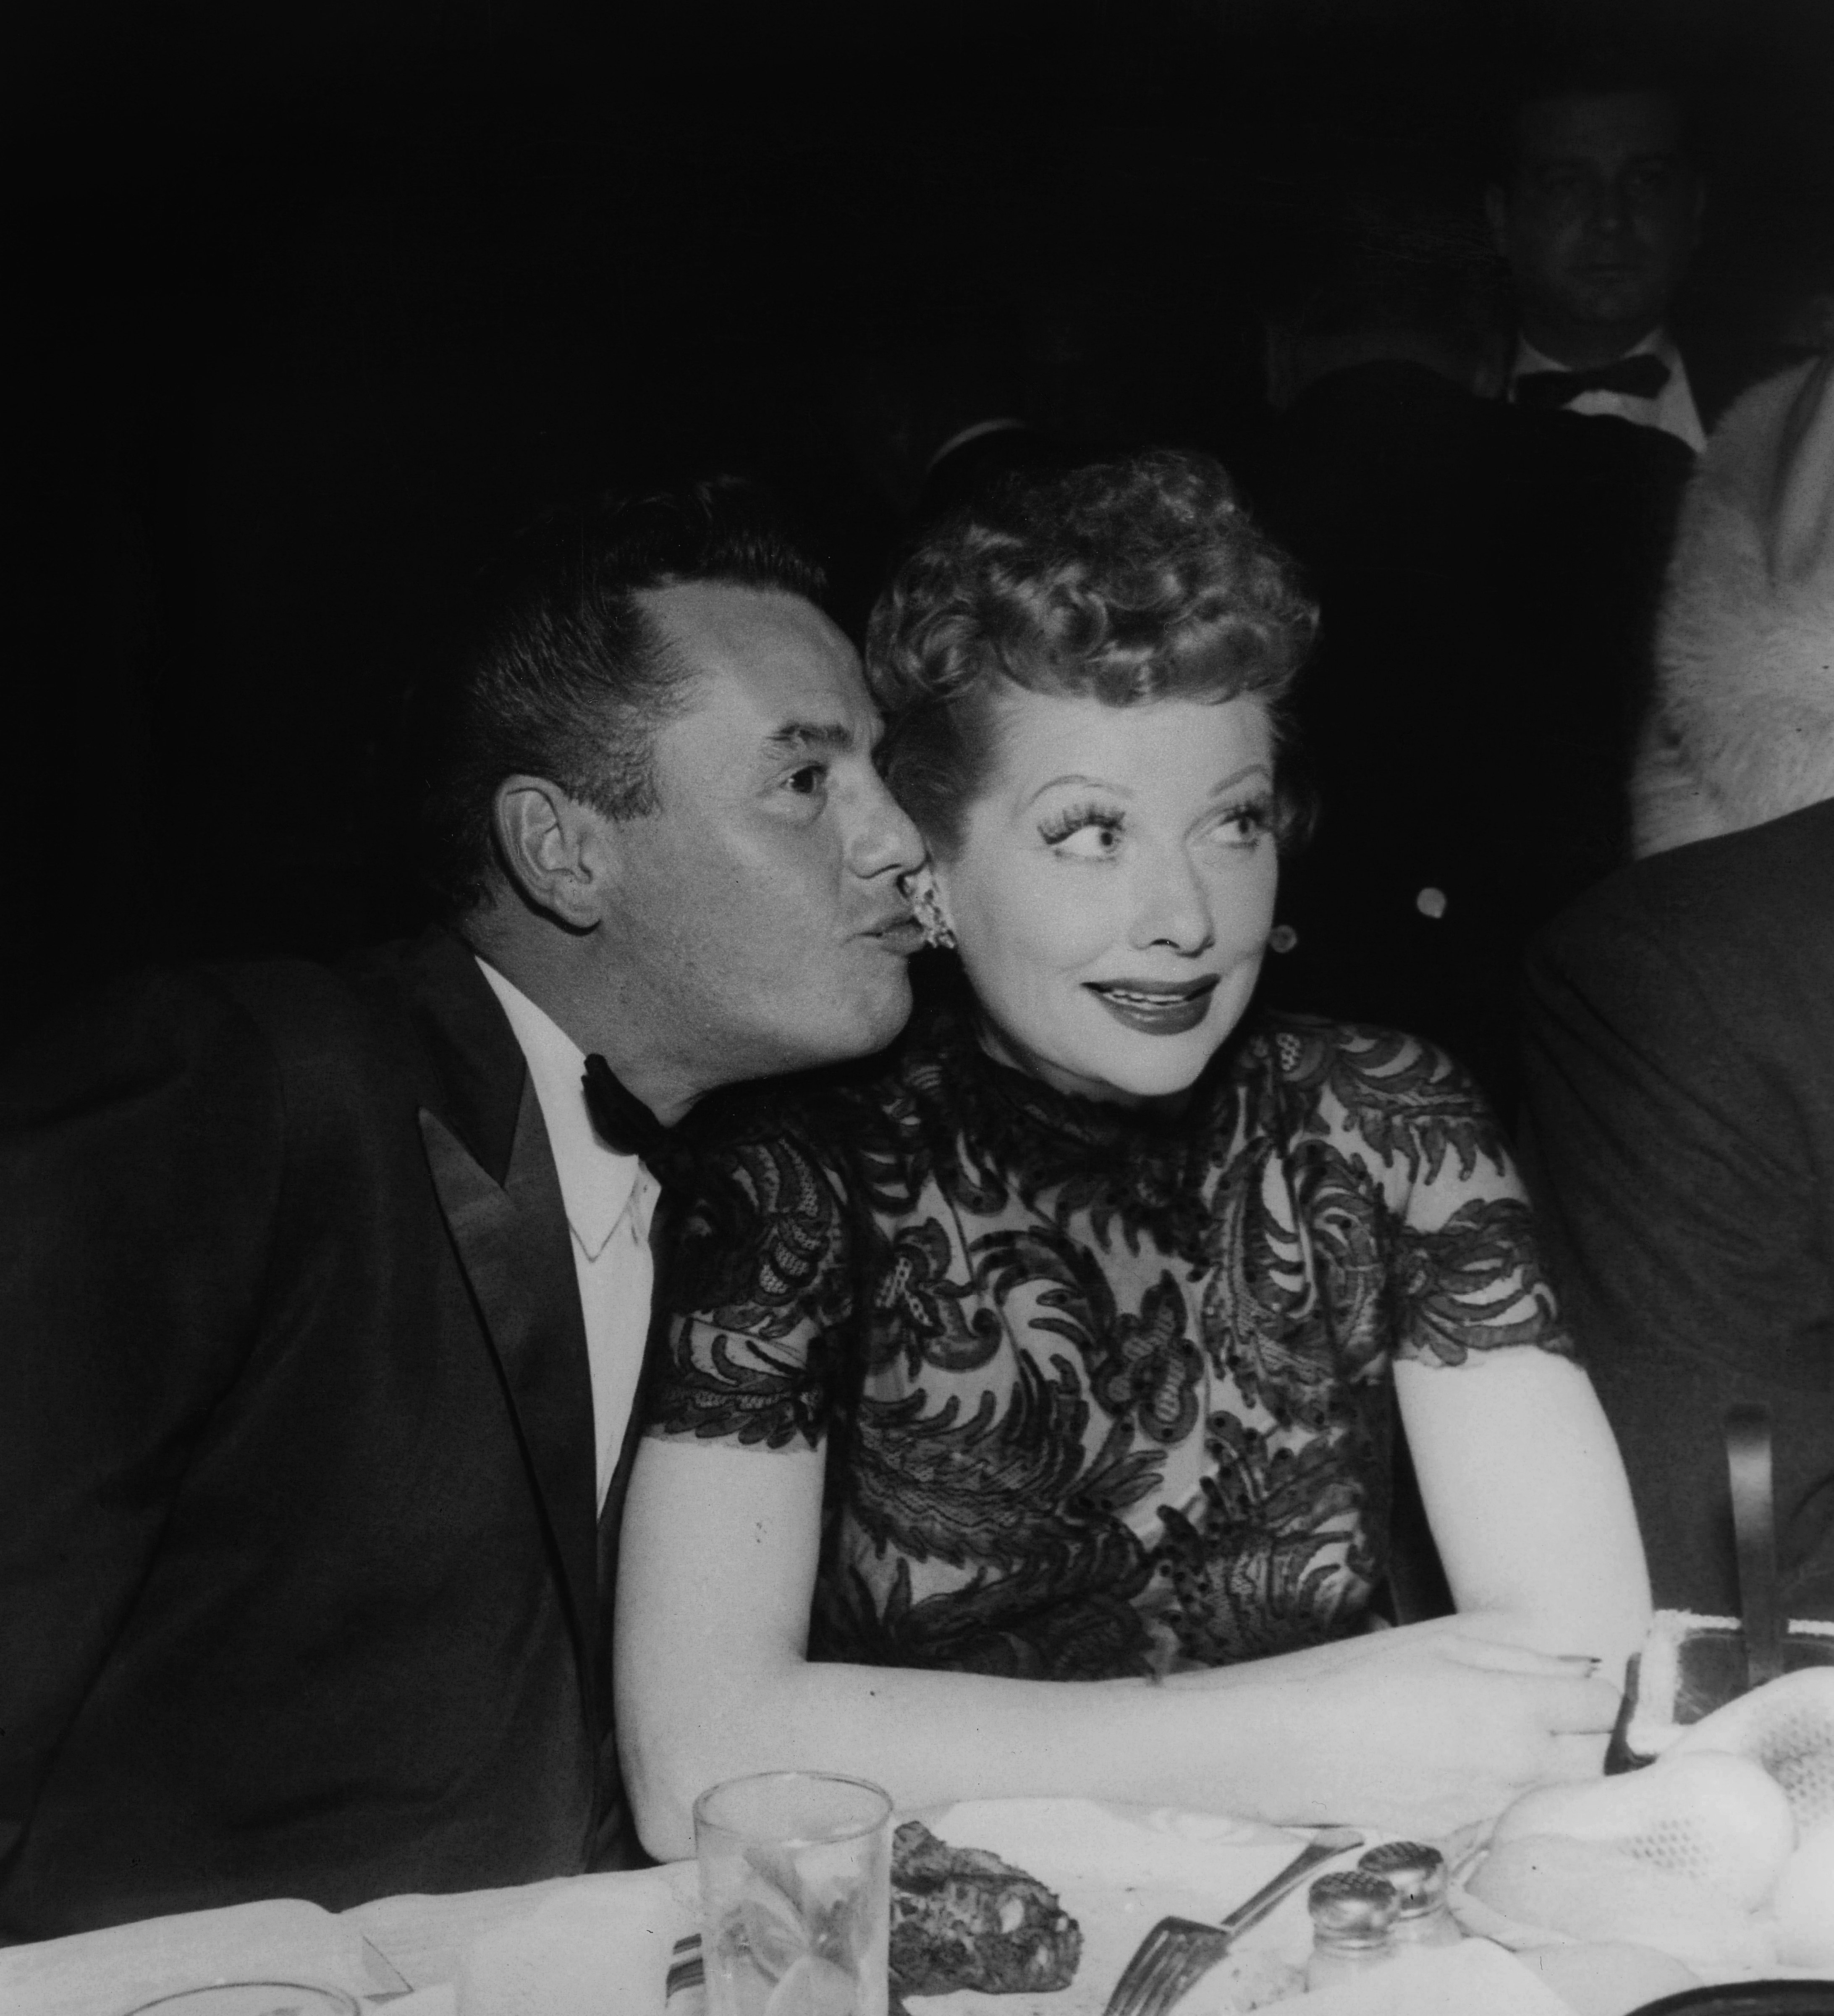 Photo of Actress Lucille Ball and her husband actor Desi Arnaz | Source: Getty Images